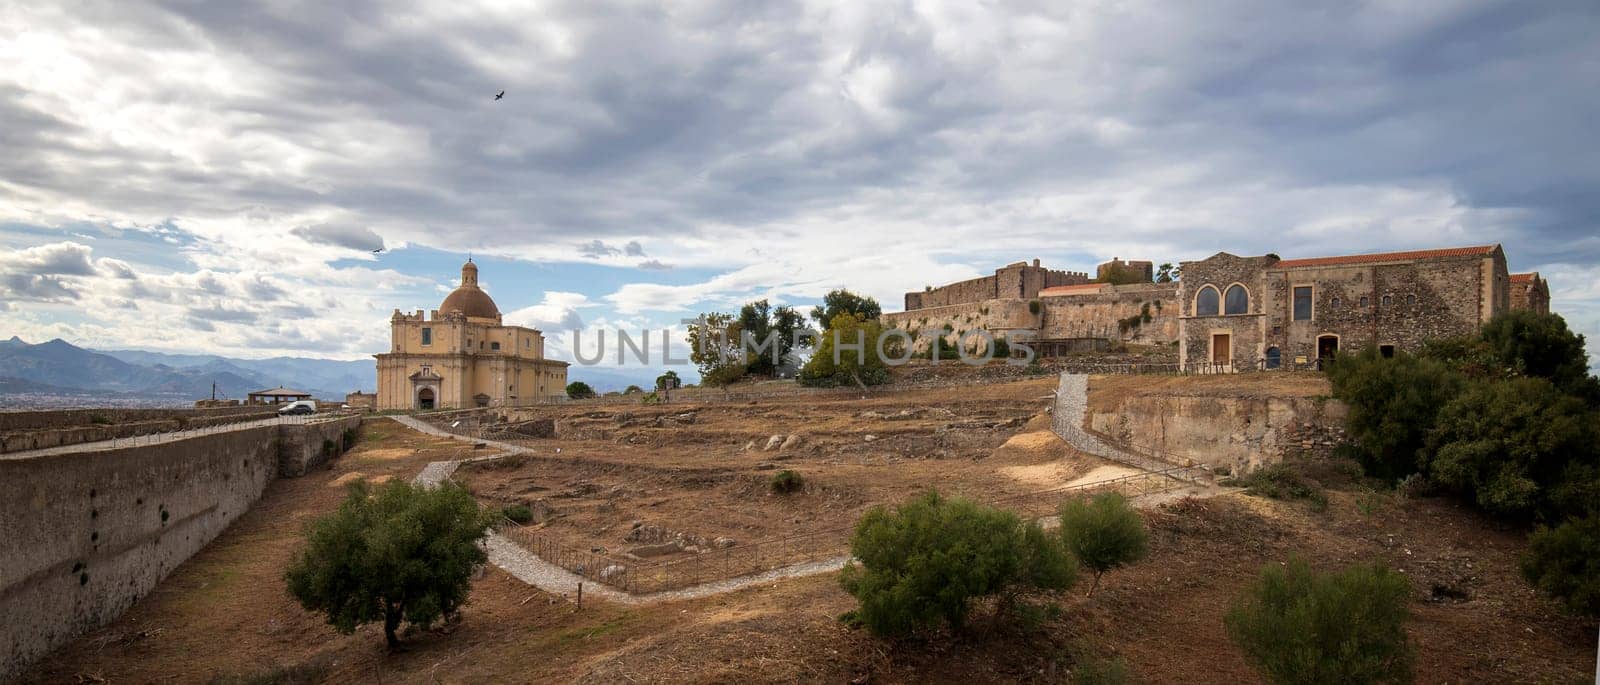 Panoramic view of the yard with cathedral and a Benedictine convent inside at Castle of Milazzo, Sicily. 